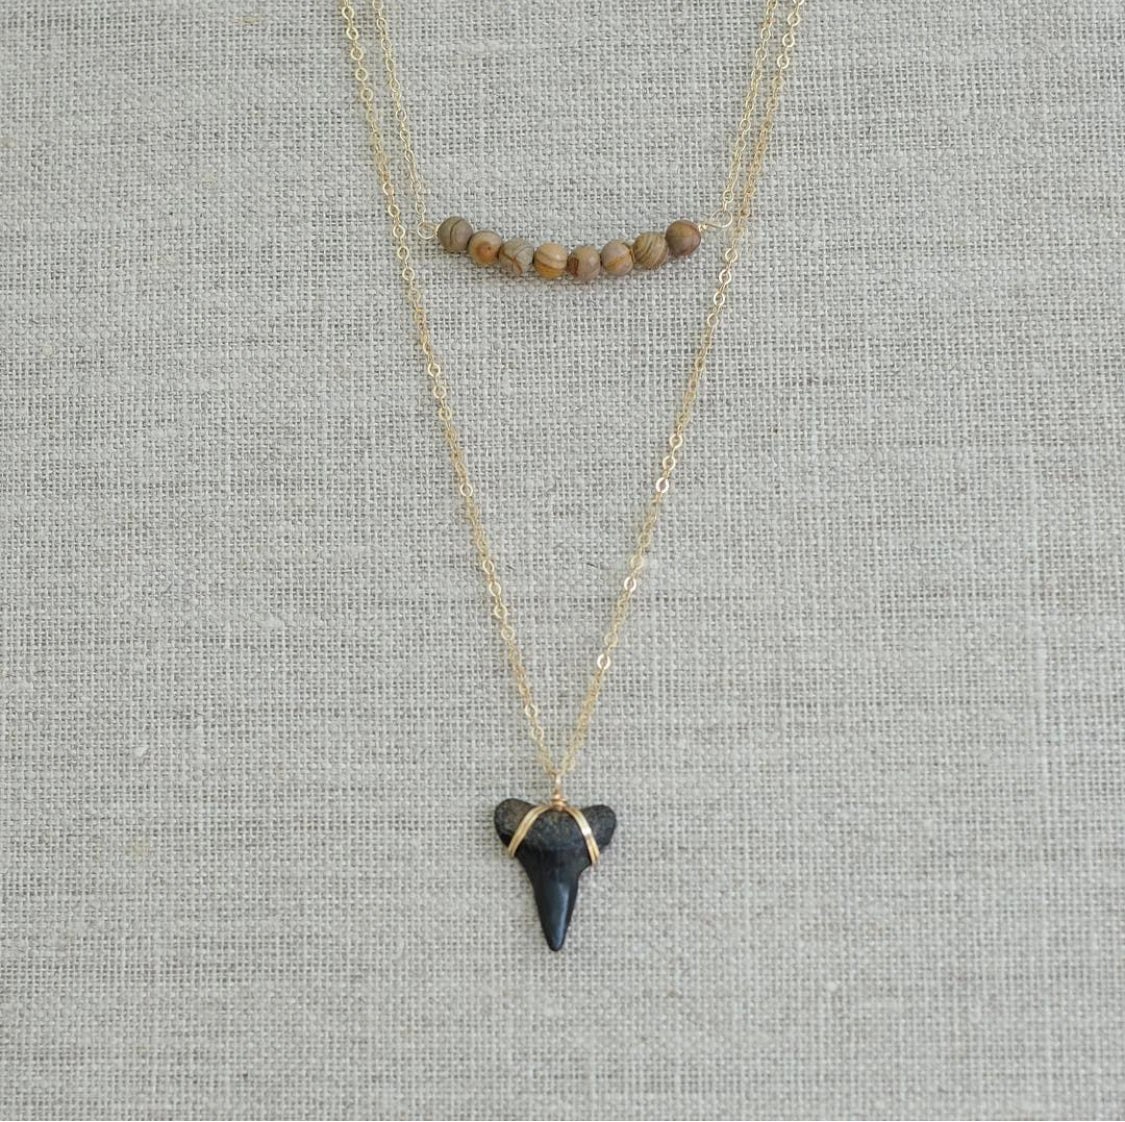 Amazon.com: Exotic & Trendy Jewelry Books and More Shark Tooth Necklace -  Resin Tooth - Shark Tooth Adjustable Surfer Necklace - Coqui Taino Necklace  (Black Tooth): Clothing, Shoes & Jewelry